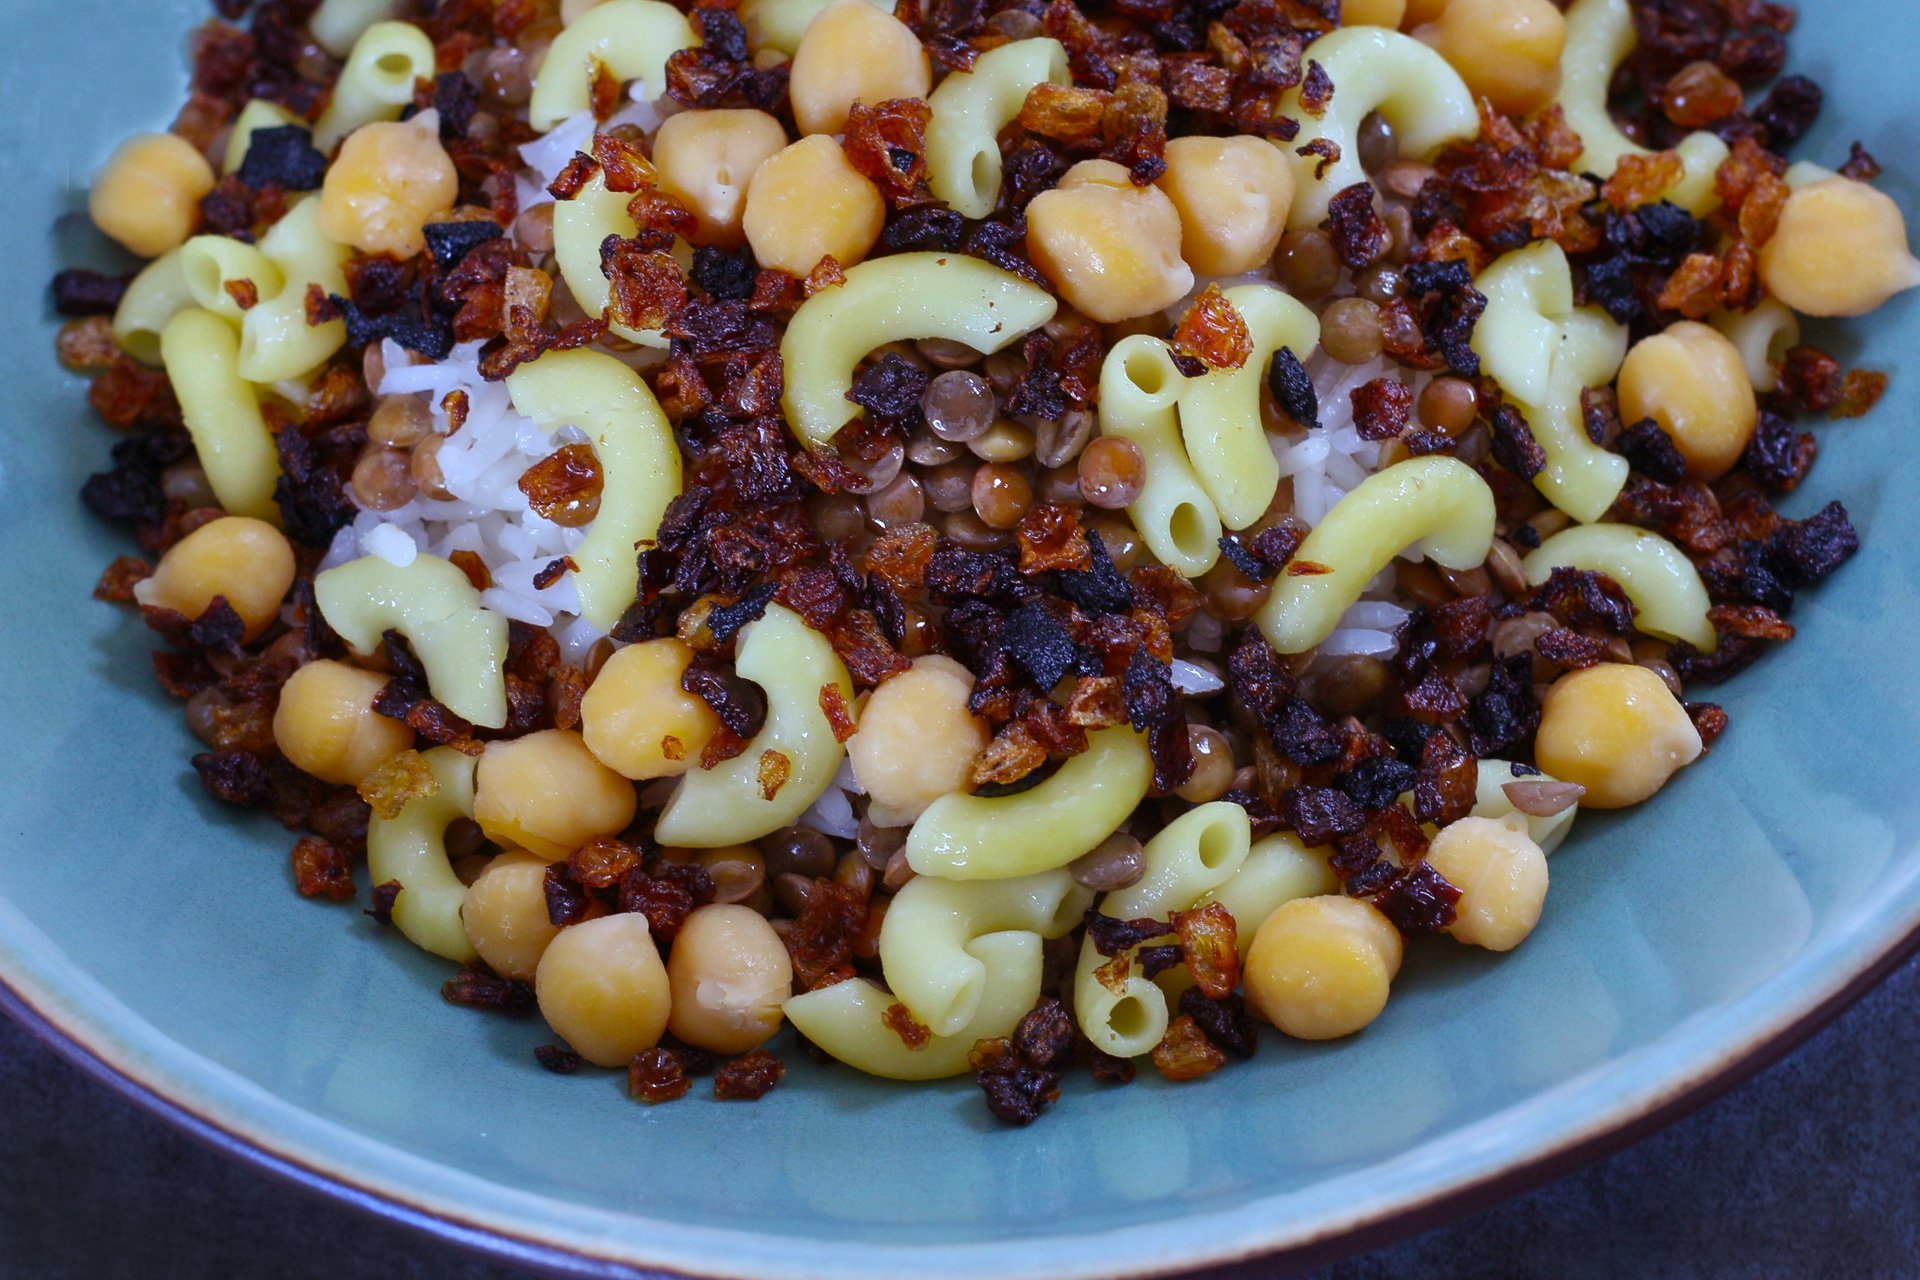 A blue bowl filled with koshari, an Egyptian dish of red lentils, macaroni noodles, chickpeas, and rice